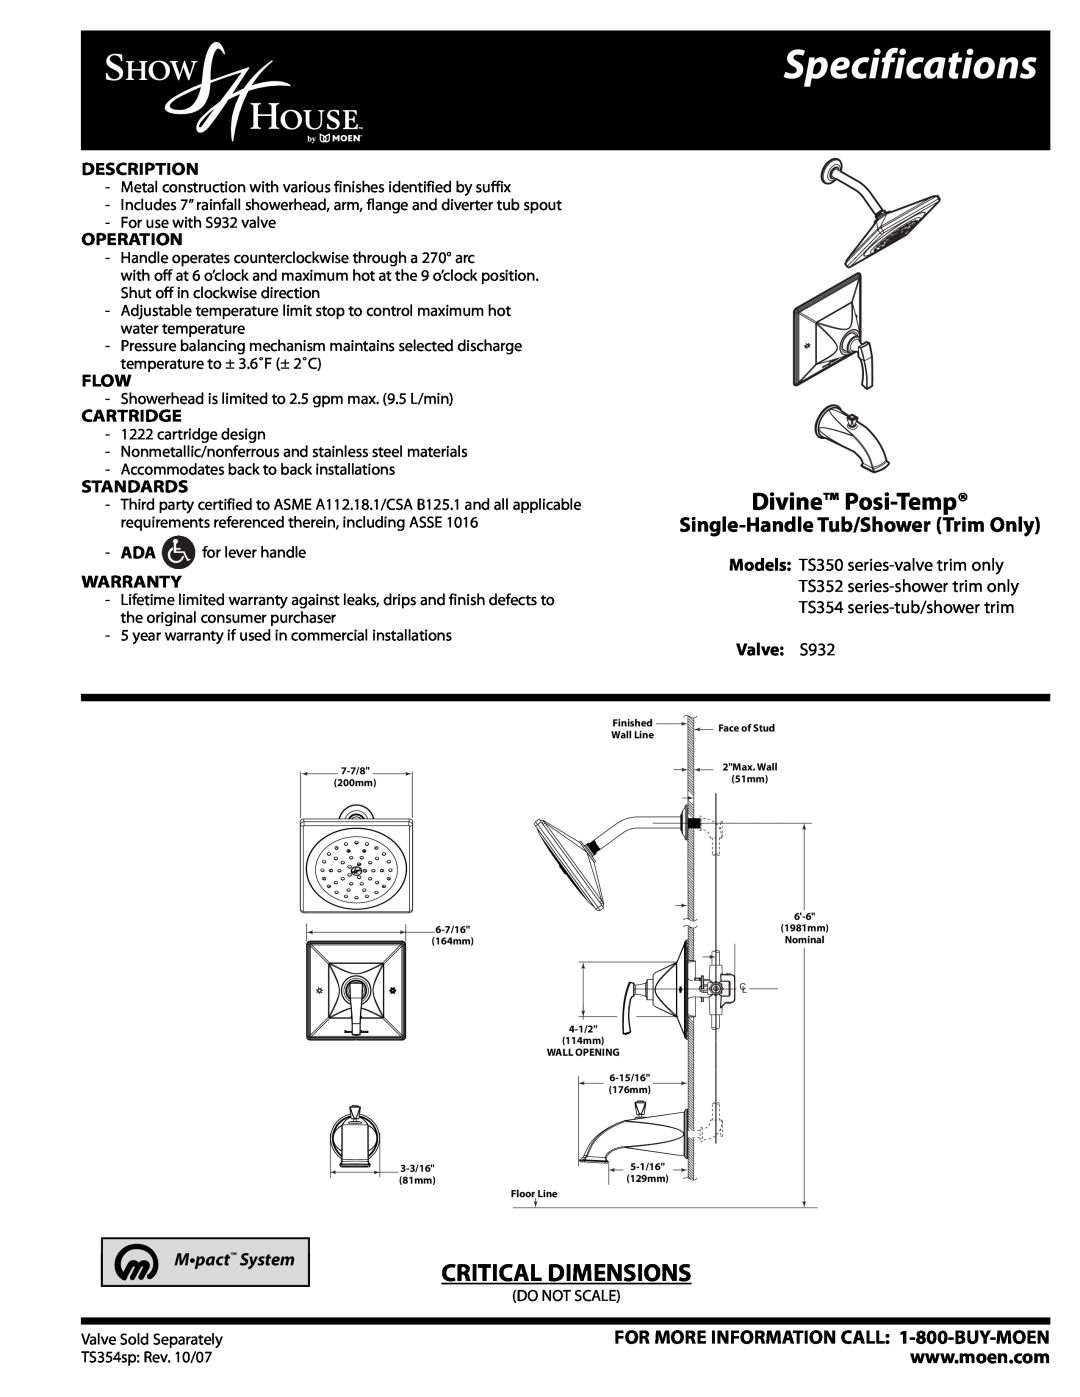 Moen TS350 specifications Specifications, Divine Posi-Temp, Critical Dimensions, Single-Handle Tub/Shower Trim Only, Flow 